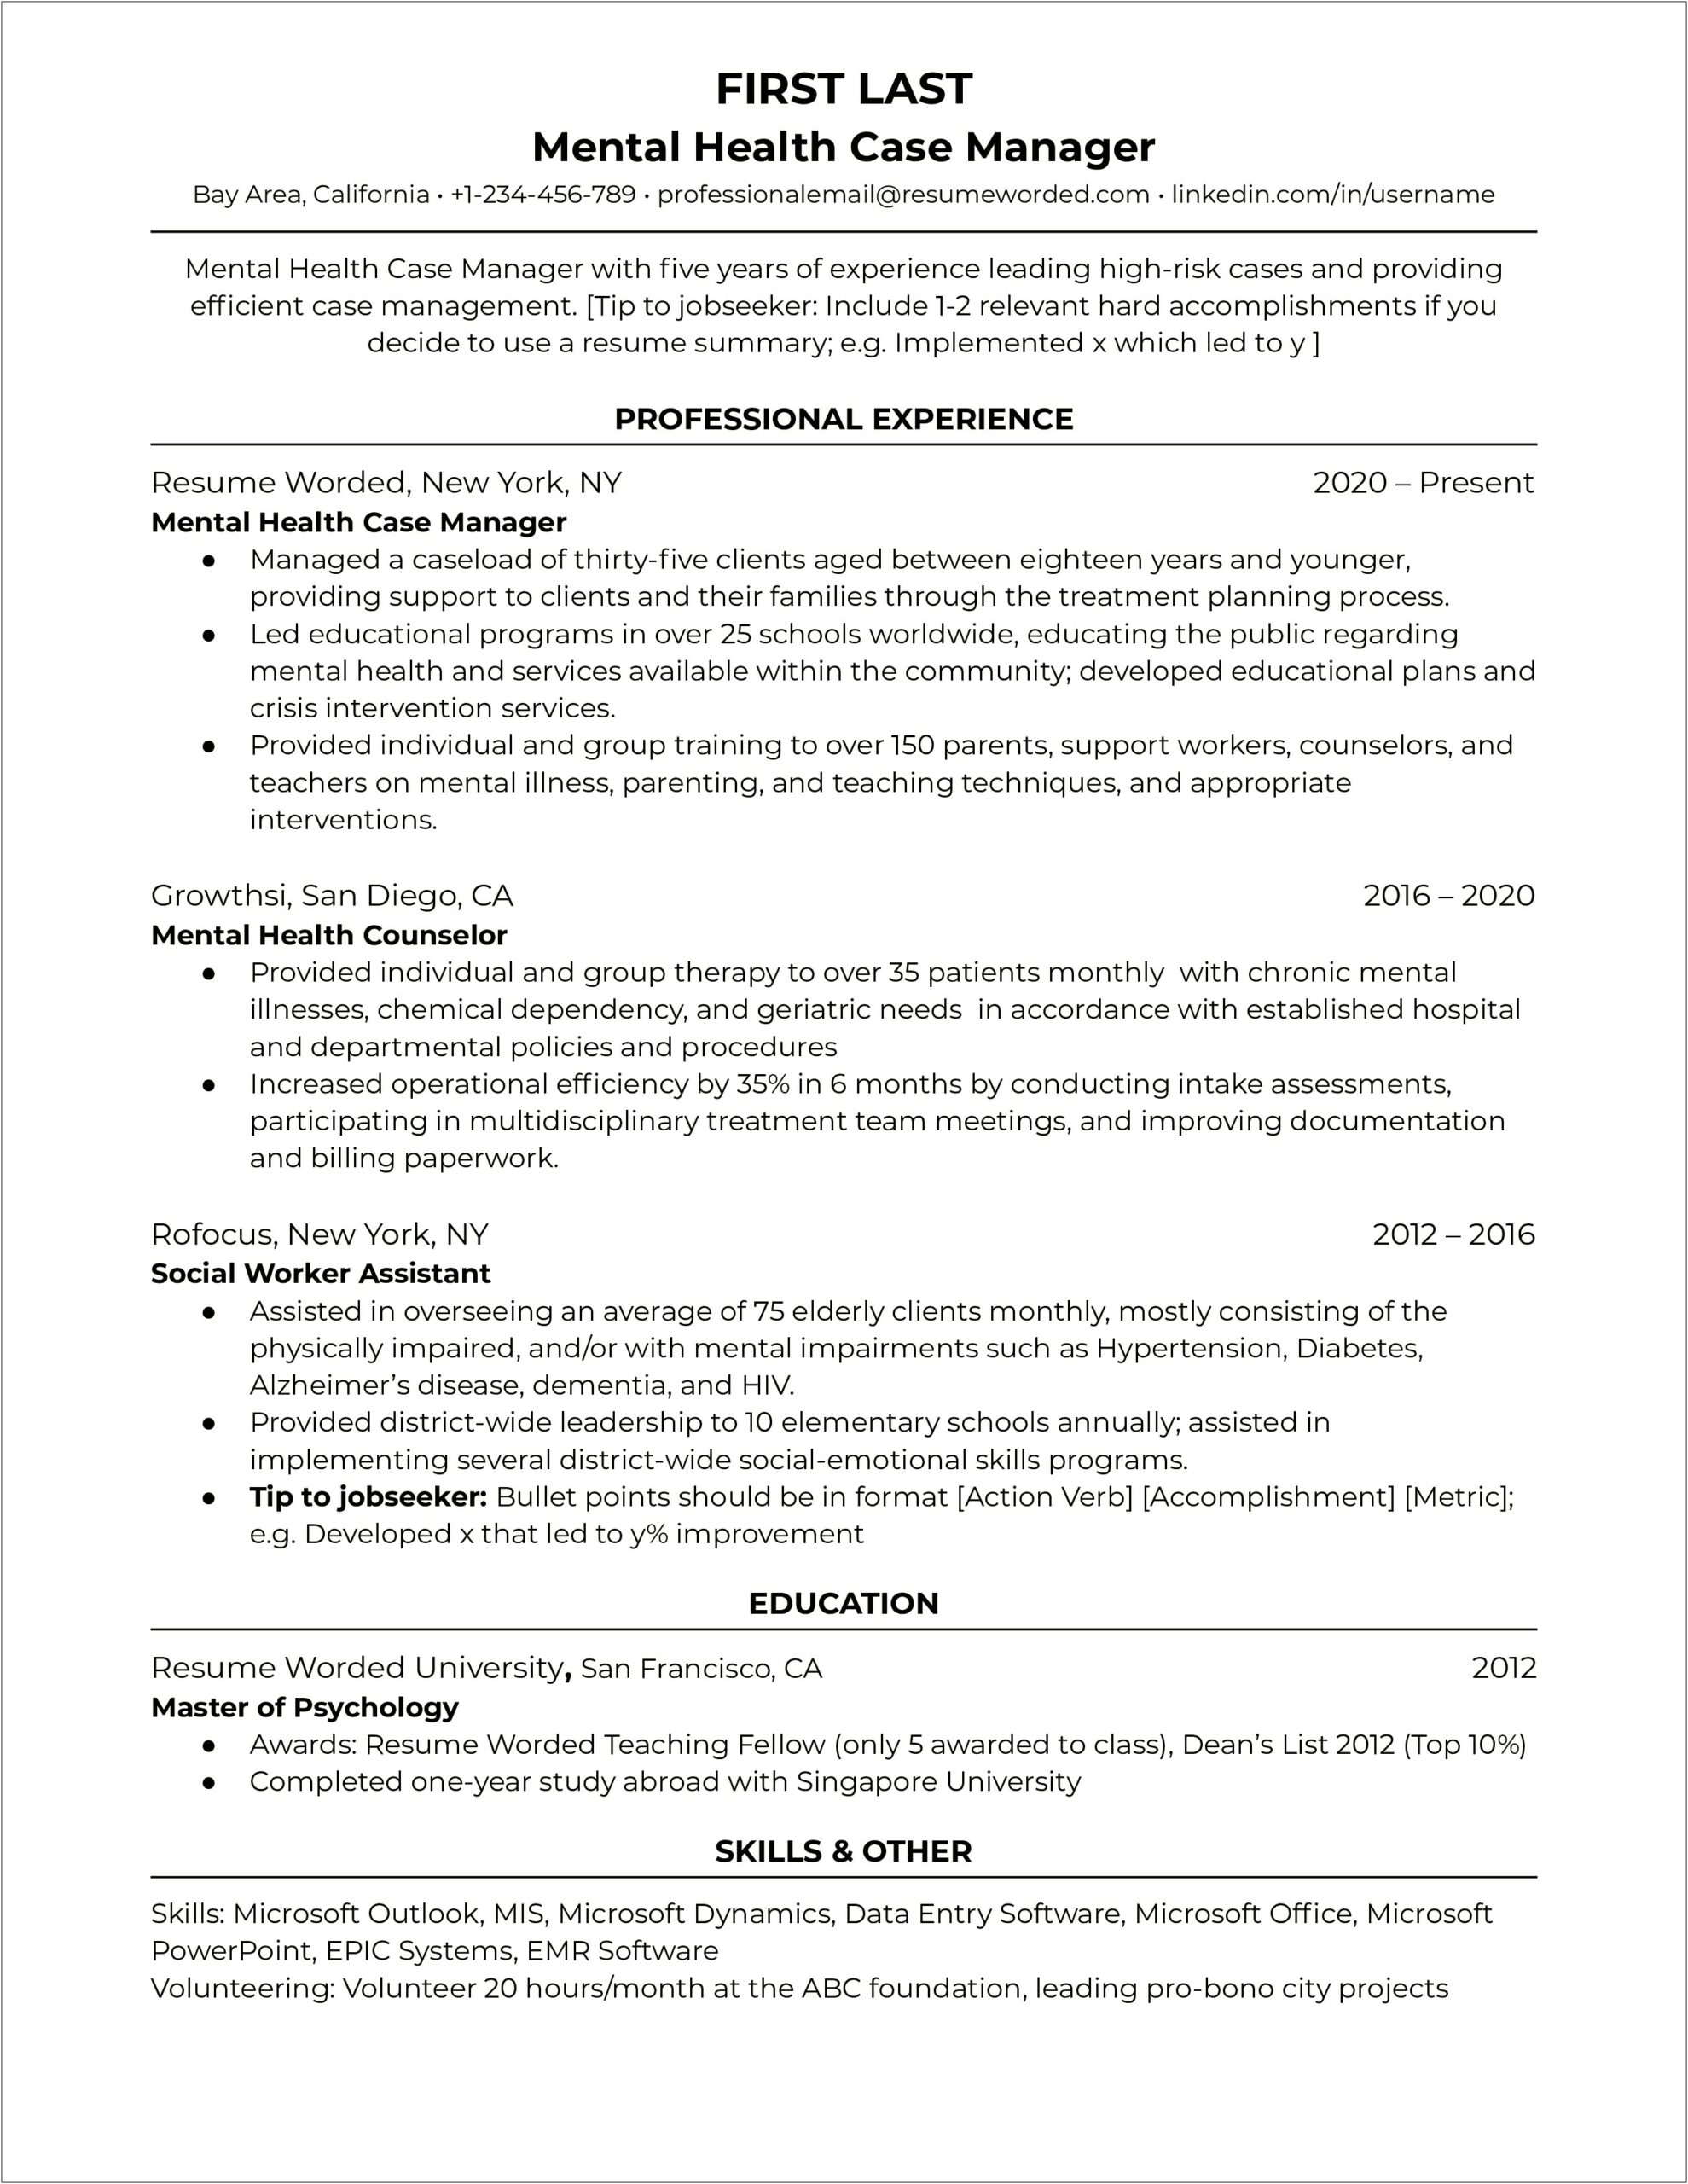 Qualification Examples For Mental Health Counselor Resumes